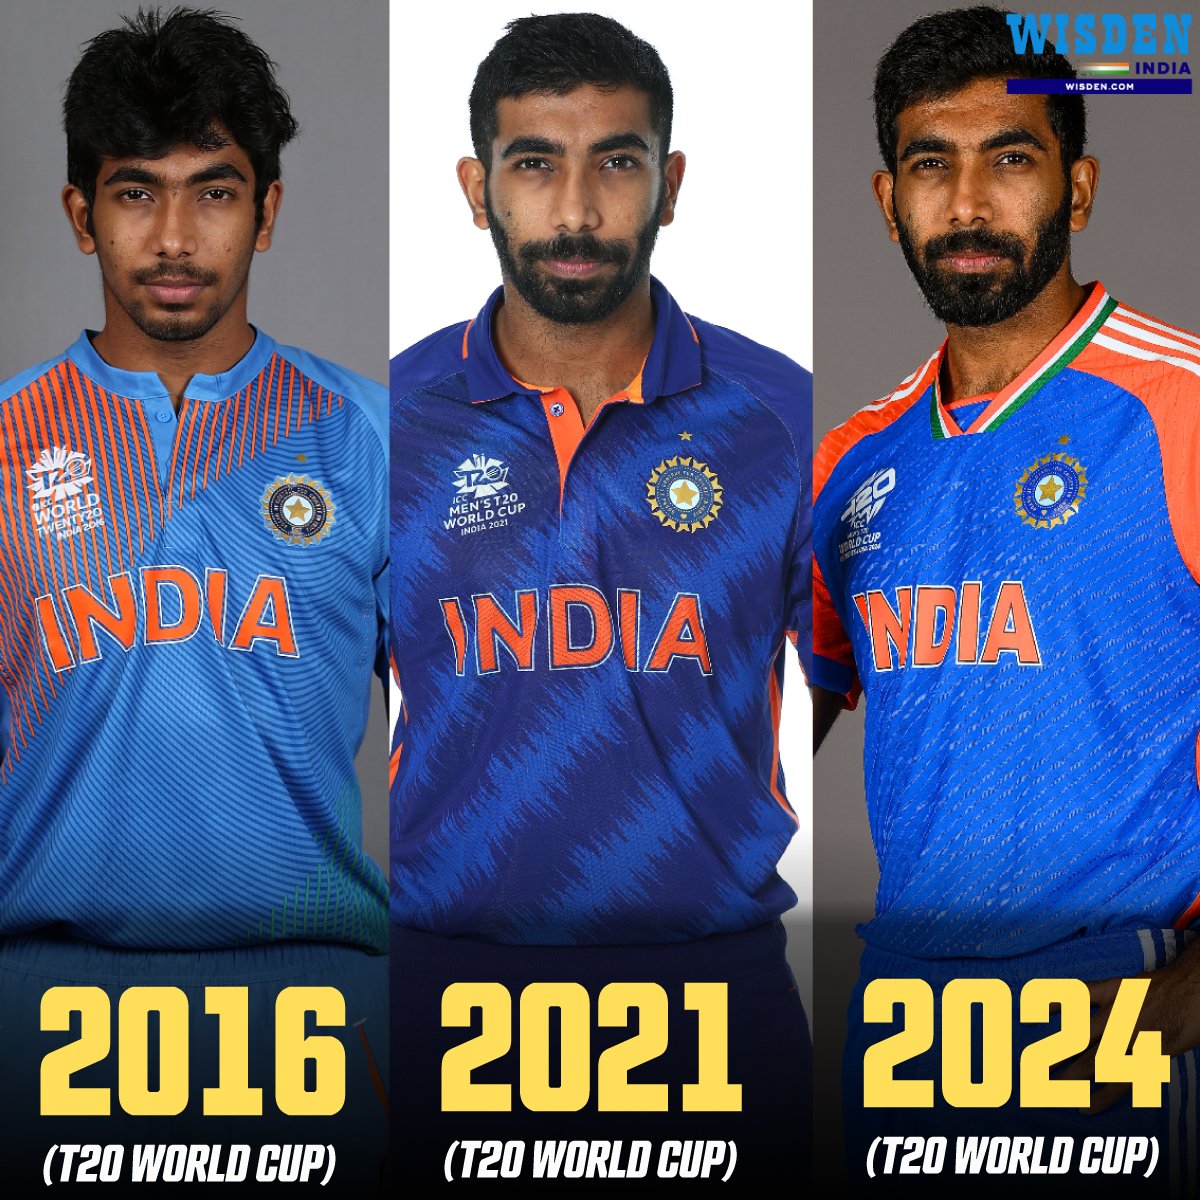 2016 T20 World Cup - 4 wickets in 5 matches. 2021 T20 World Cup - 7 wickets in 5 matches. Jasprit Bumrah is all set for the 2024 T20 World Cup 👏 #JaspritBumrah #India #INDvsPAK #Cricket #T20WorldCup